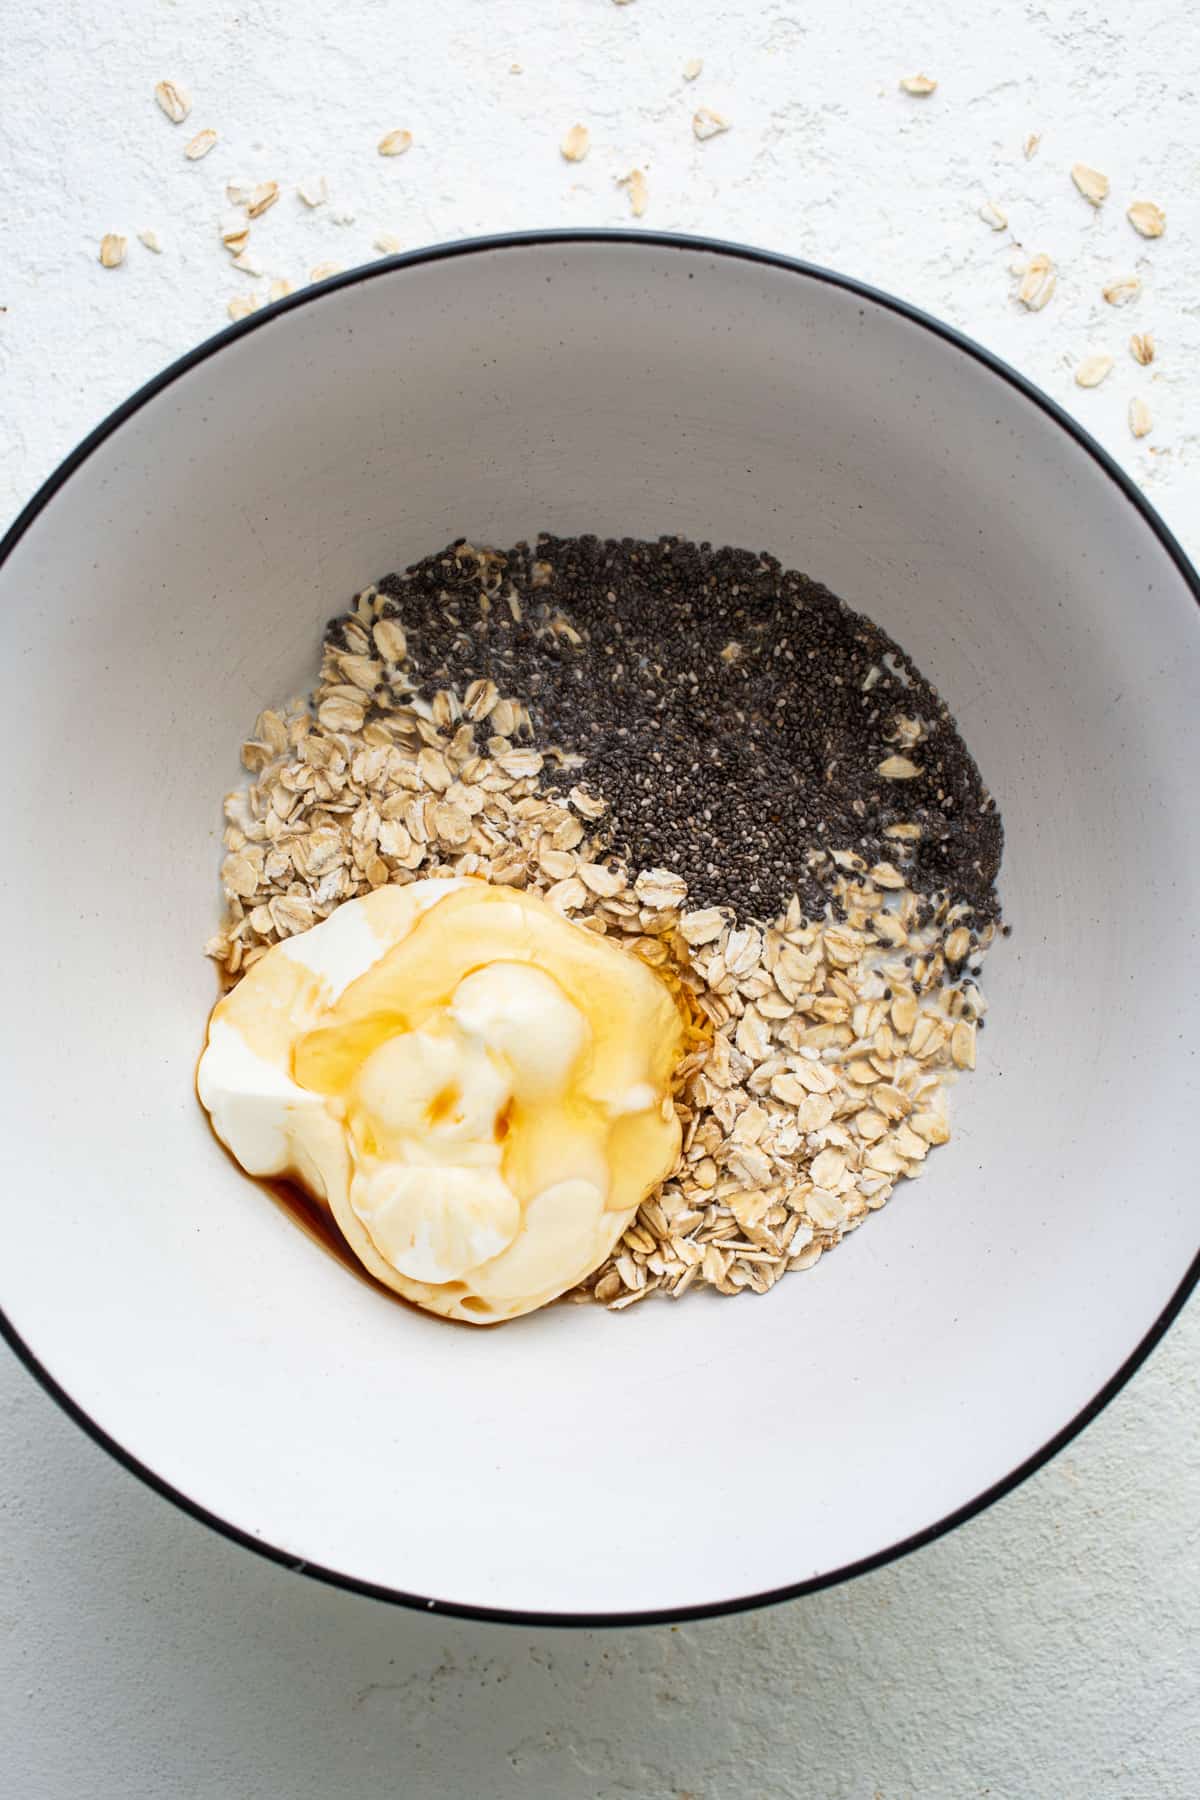 Step by step guide how to make Overnight Oats - LiveBest